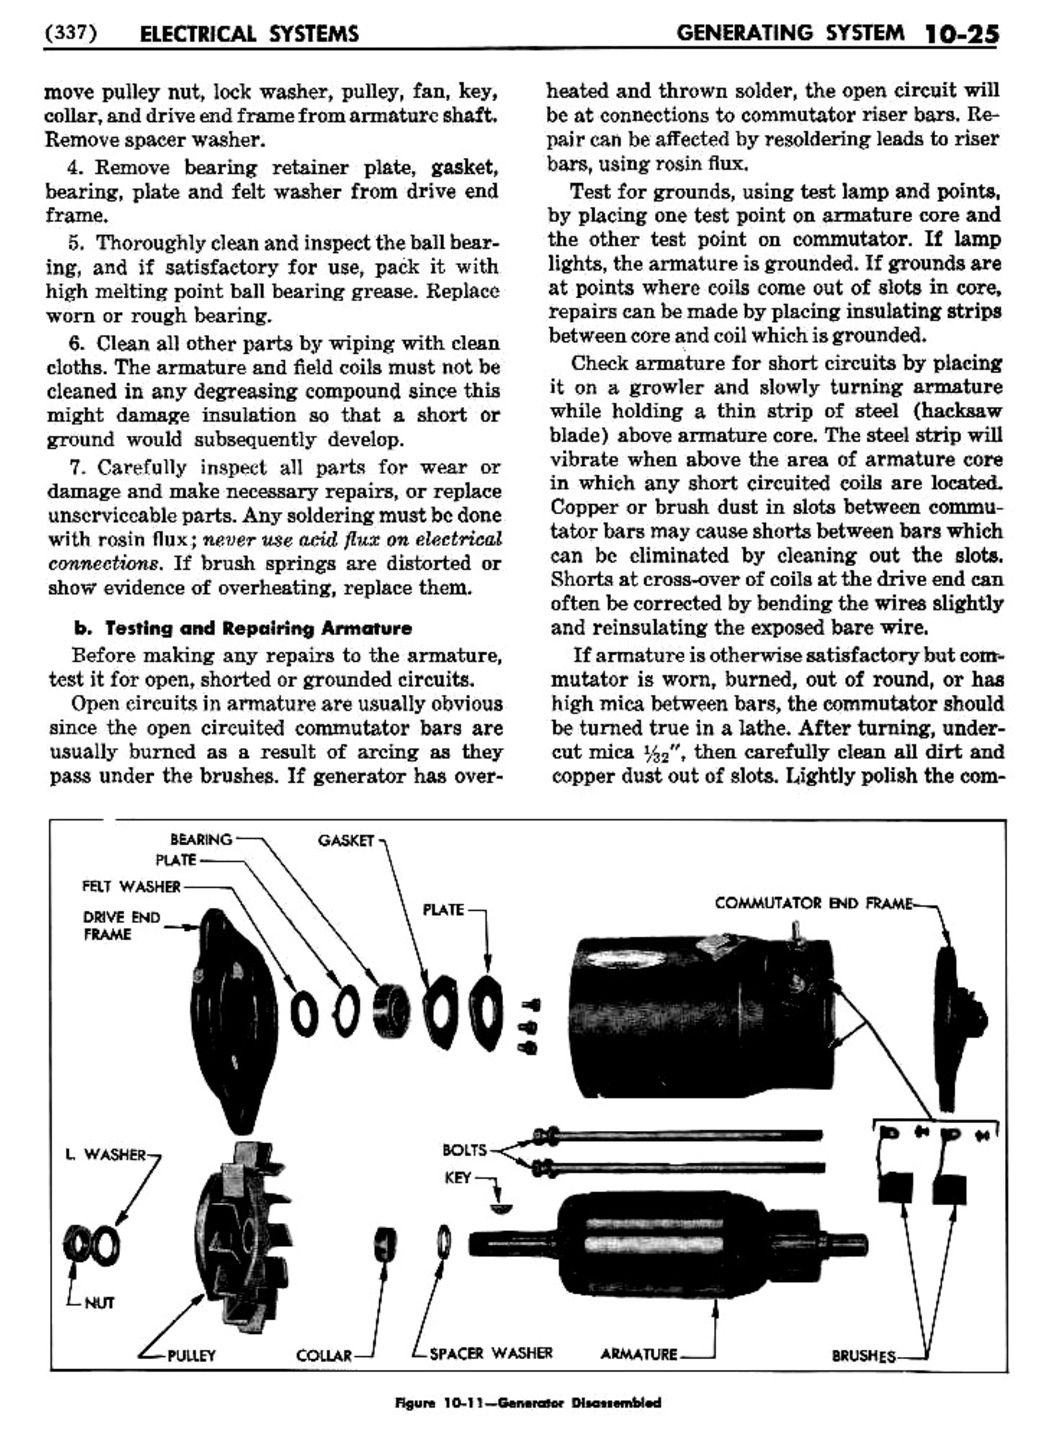 n_11 1954 Buick Shop Manual - Electrical Systems-025-025.jpg